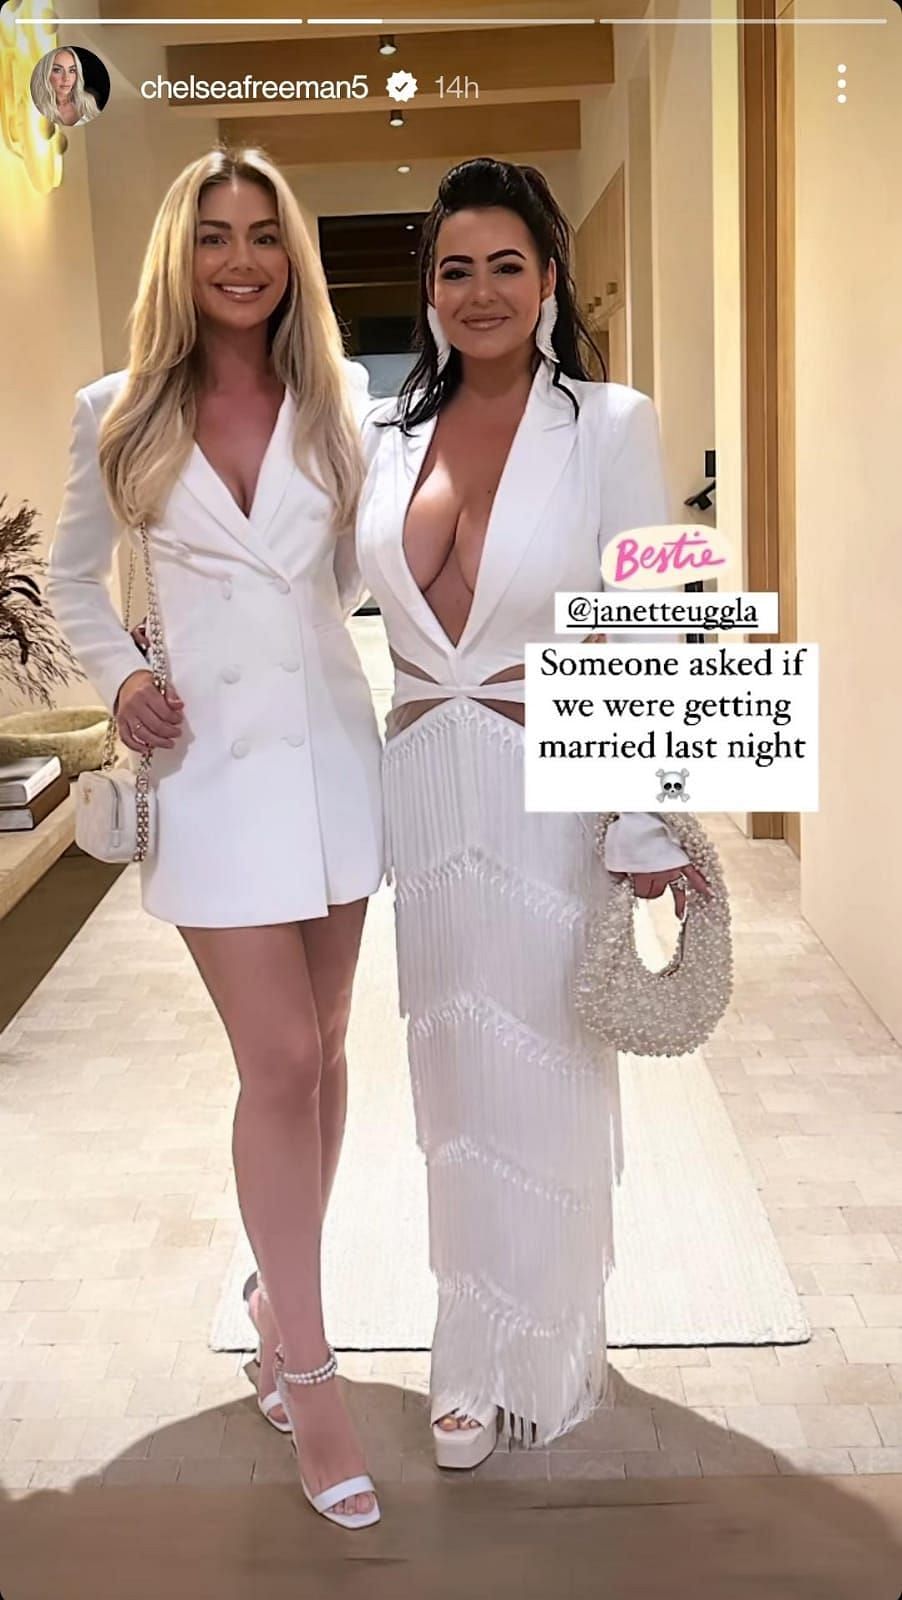 Chelsea Freeman and best friend Janette were mistaken for newlyweds in  white dresses: Someone asked if we were getting married last night